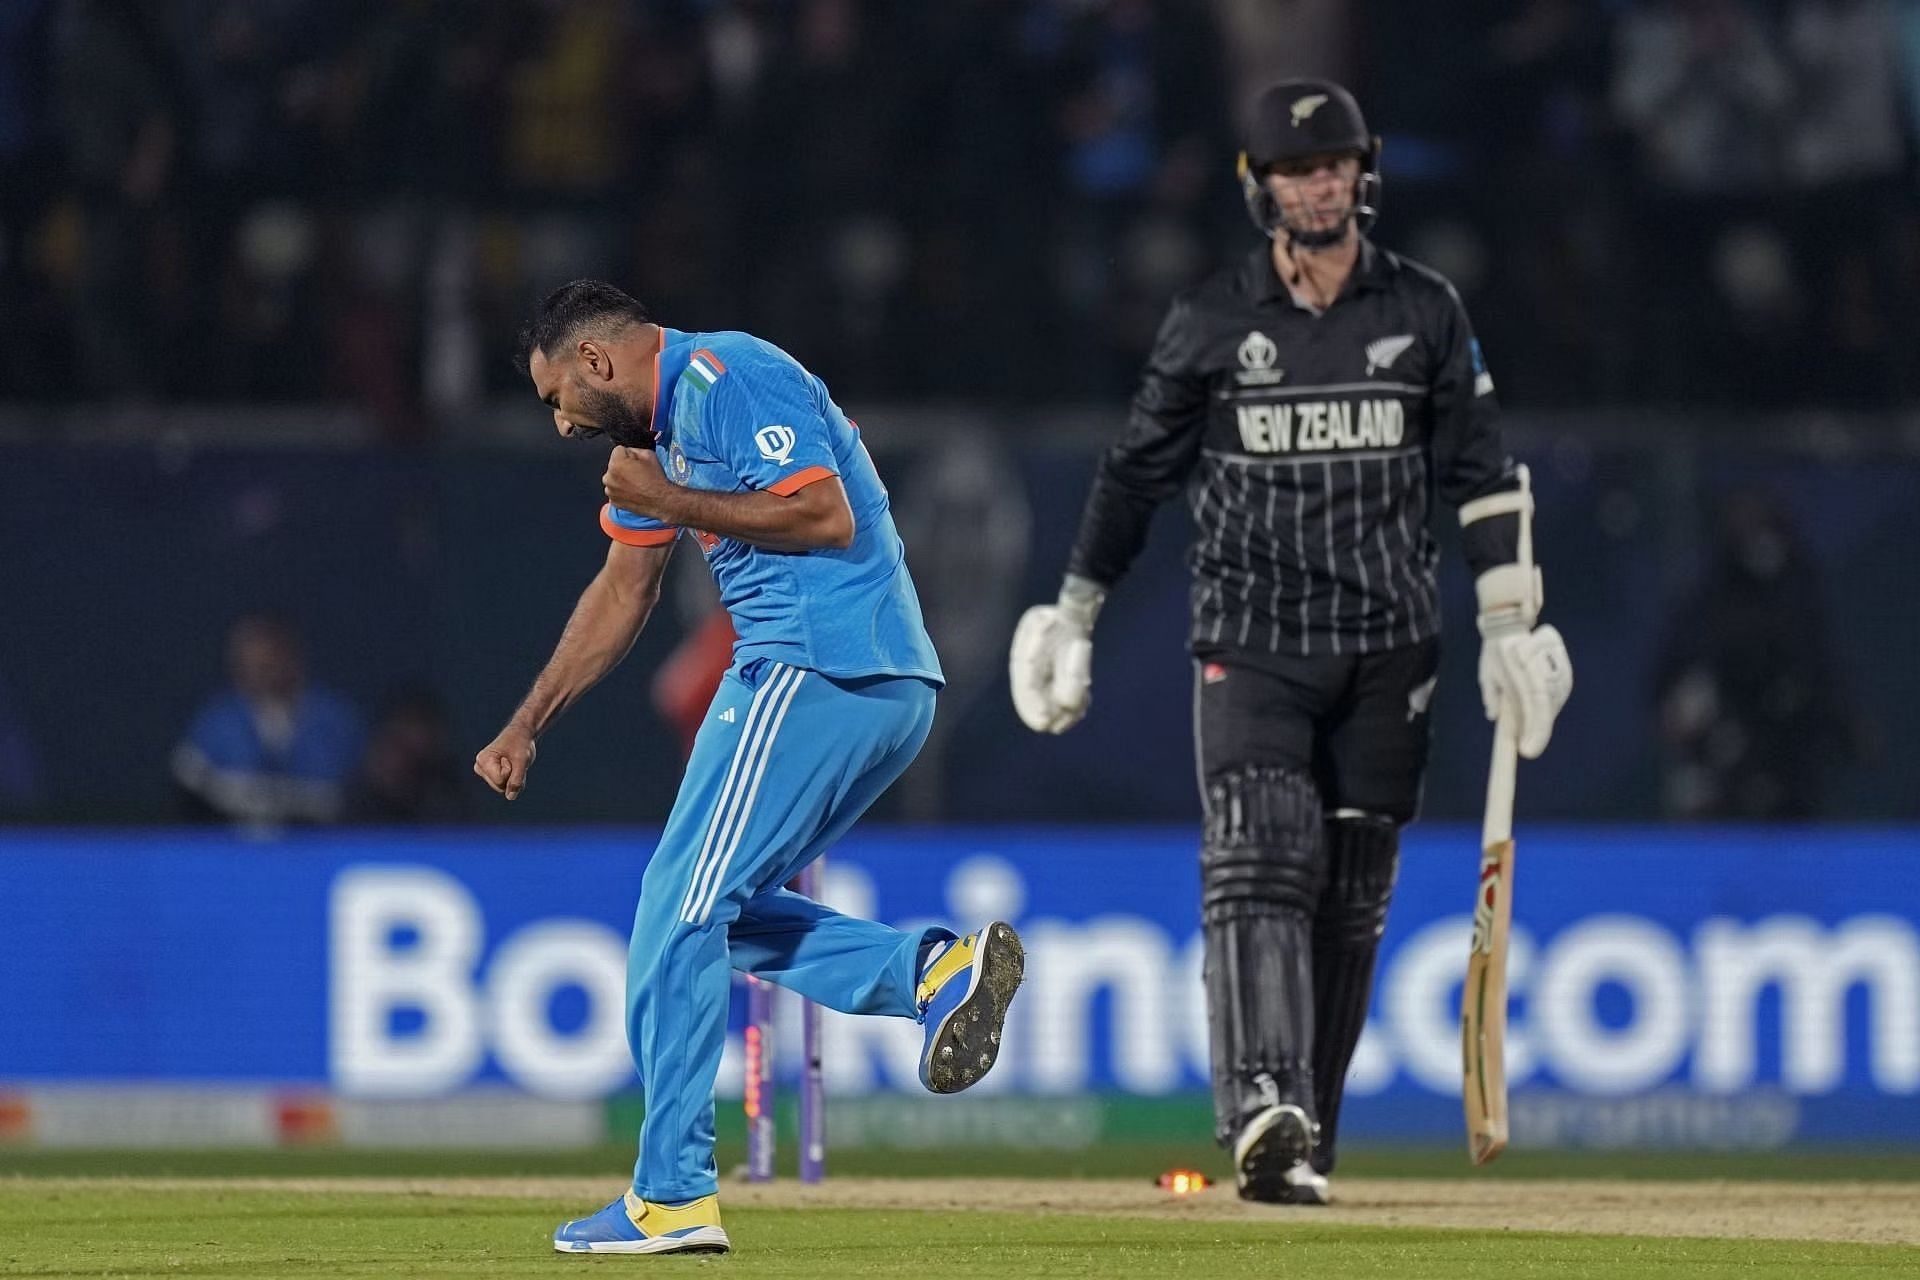 India beat New Zealand convincingly in the league phase. [P/C: AP]